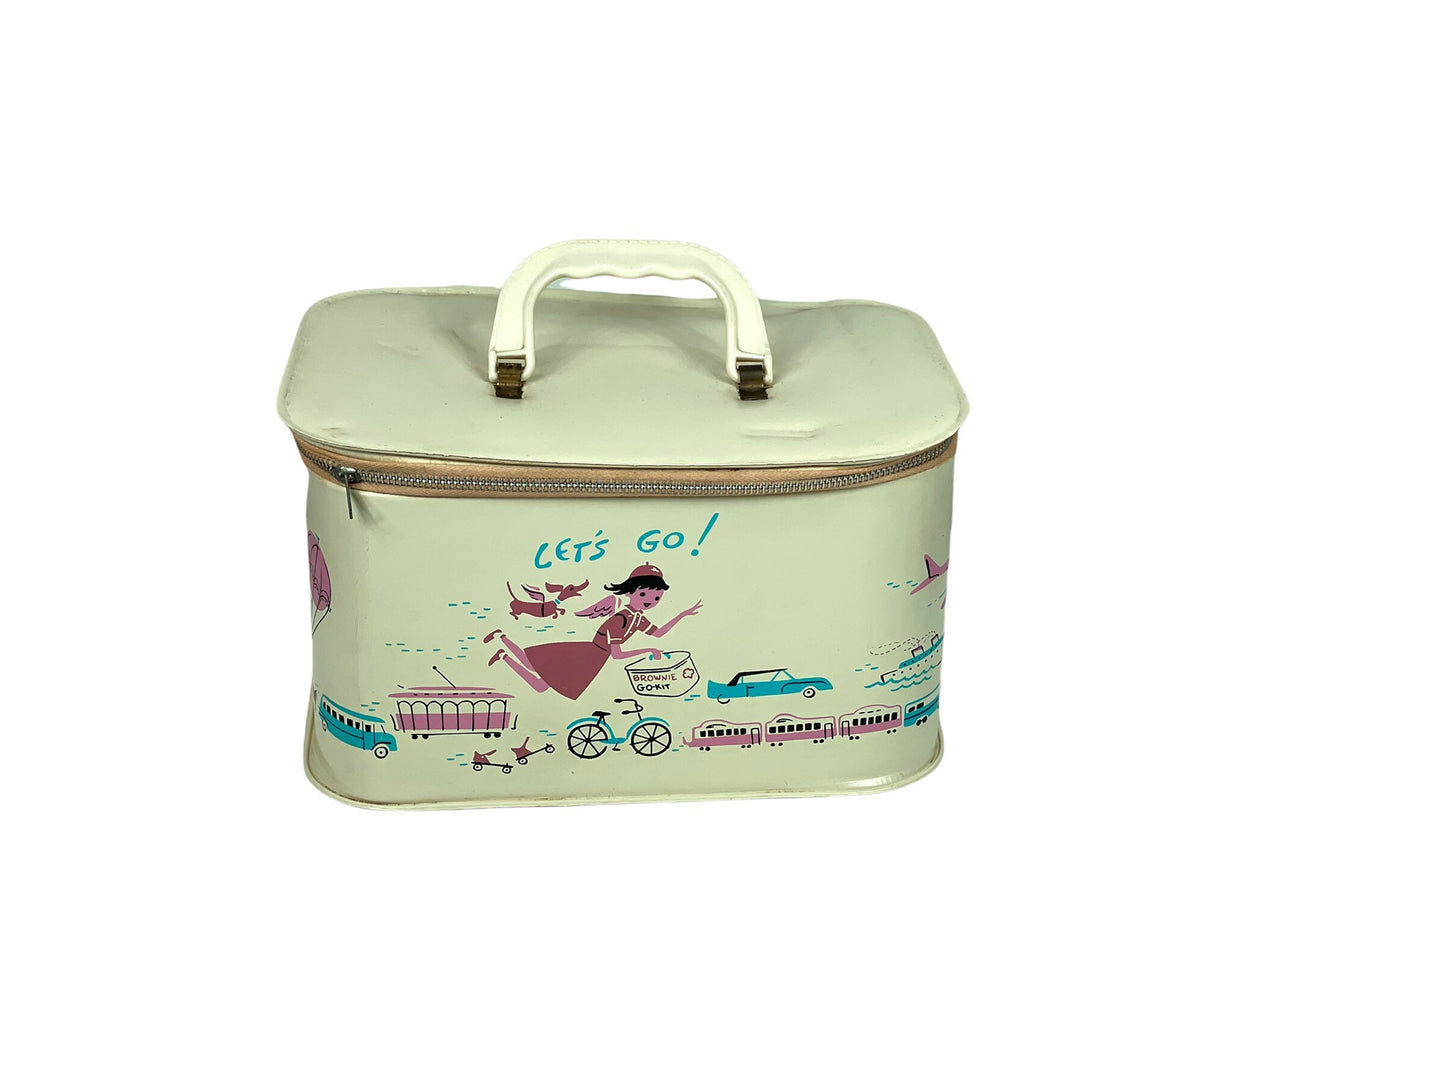 1950s Girl Scout Brownie Let’s Go travel bag